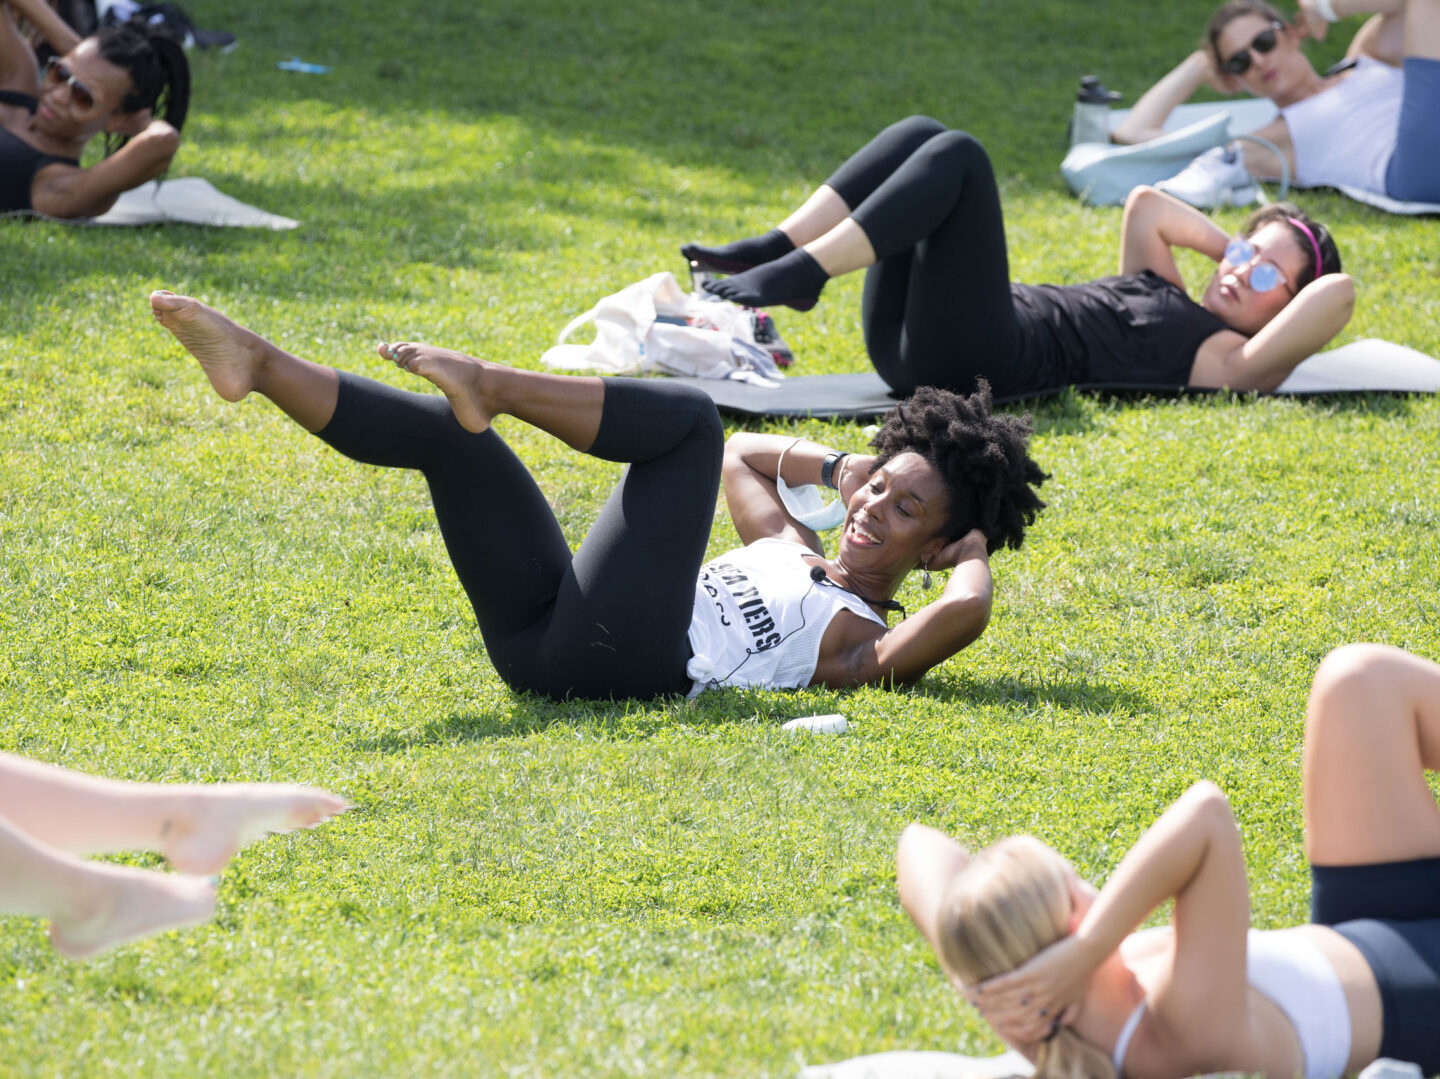 Pilates class led by Chelsea Piers Fitness on Pier 62 at Hudson River Park